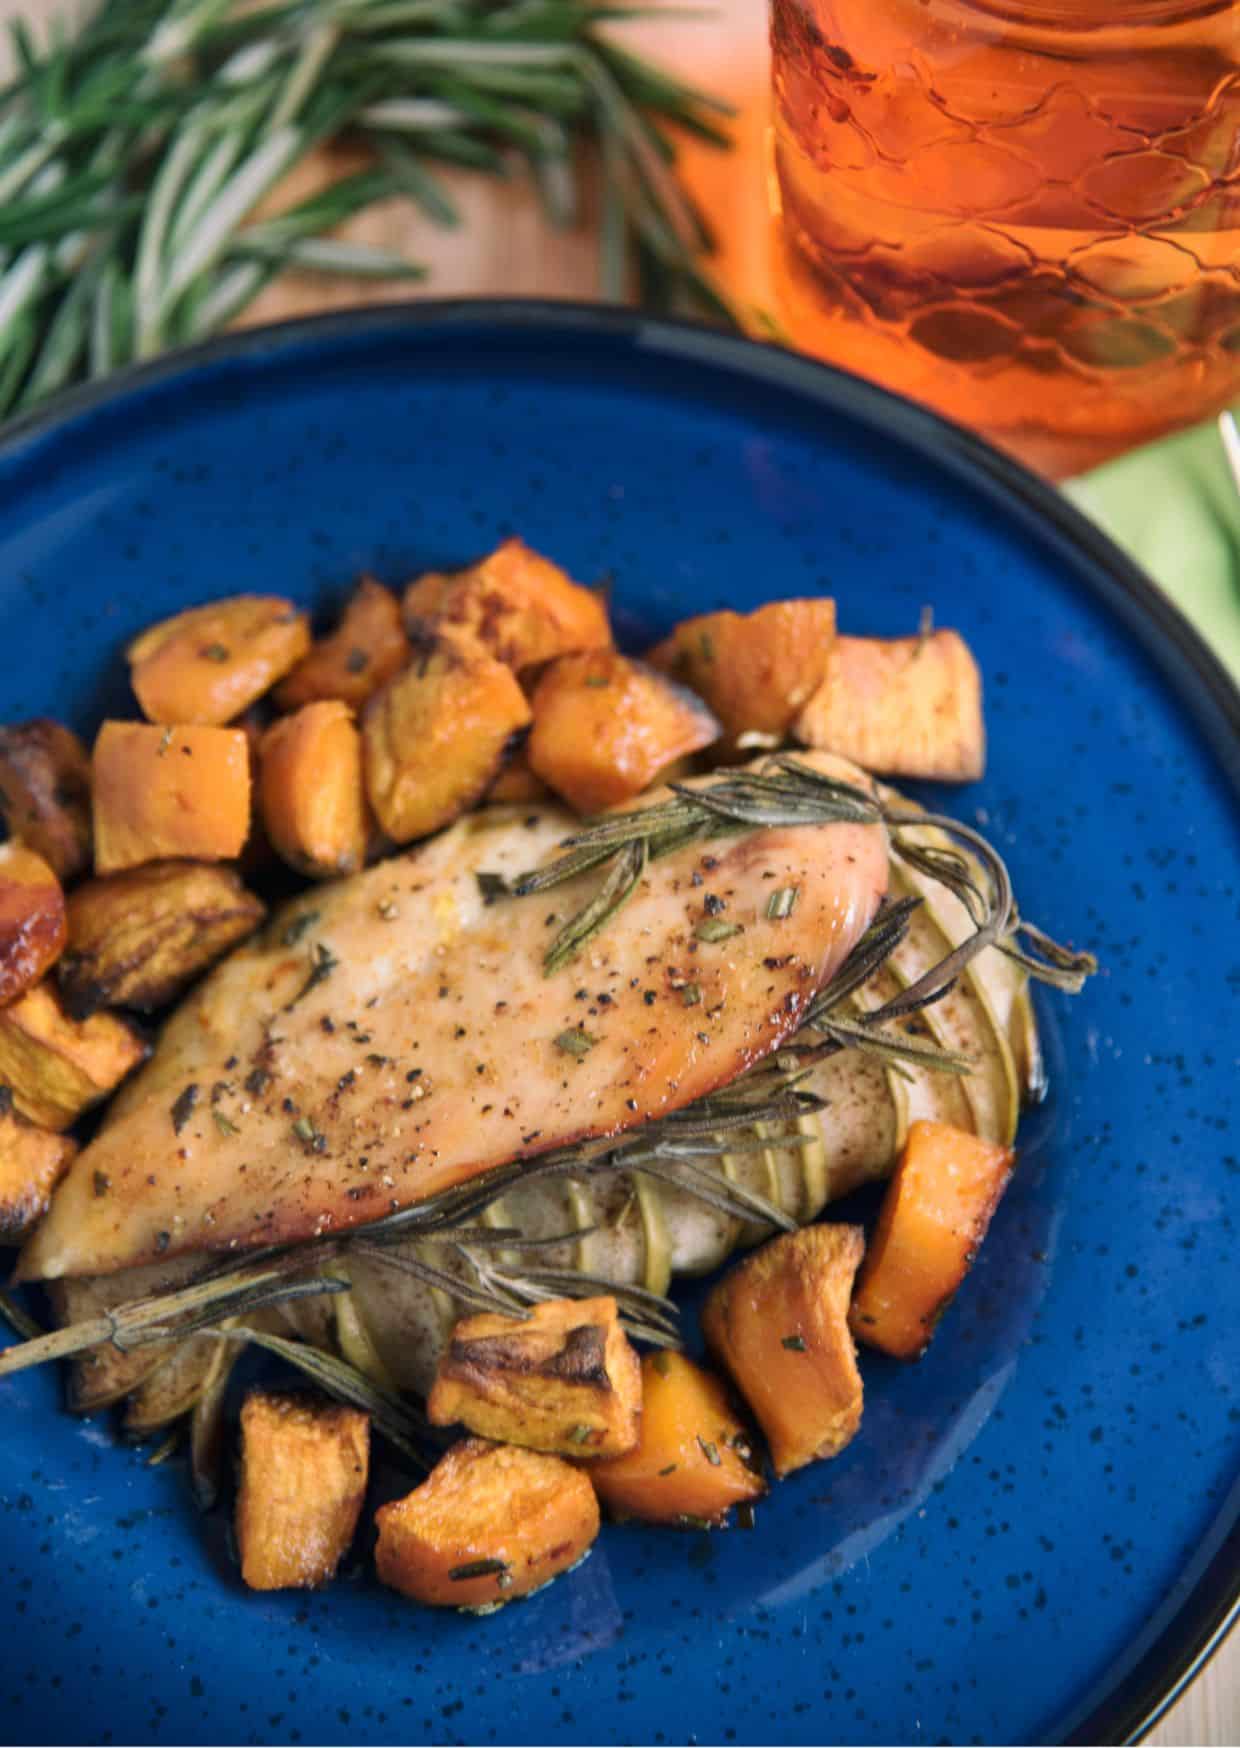 Apple-Stuffed Chicken With Sweet Potatoes on a blue plate.